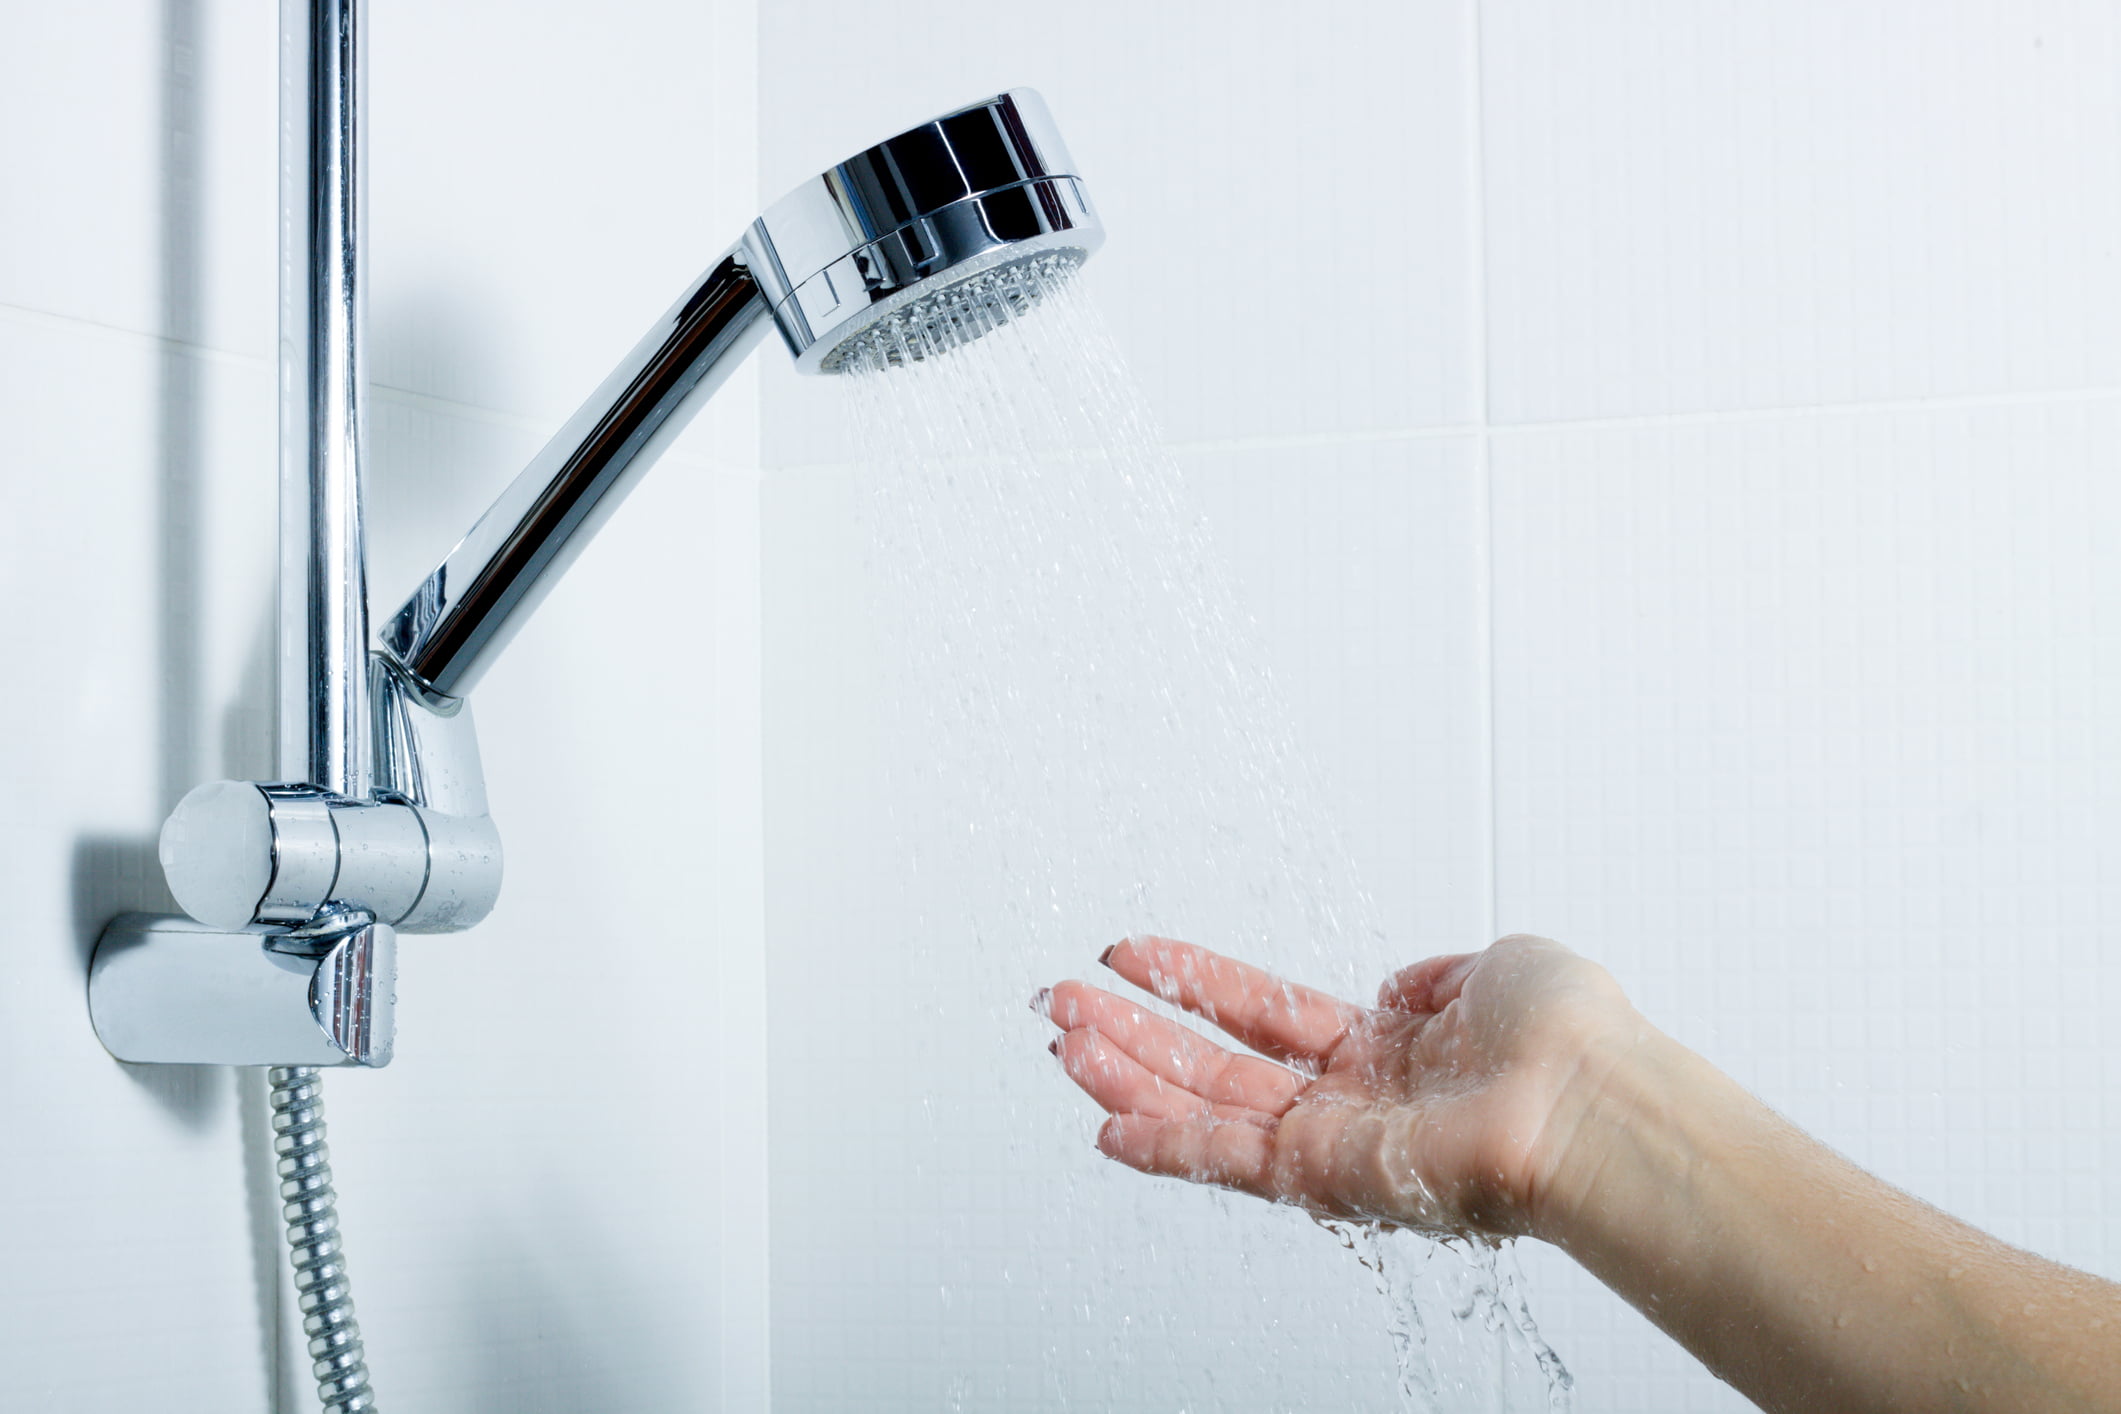 A lady's hand under showering